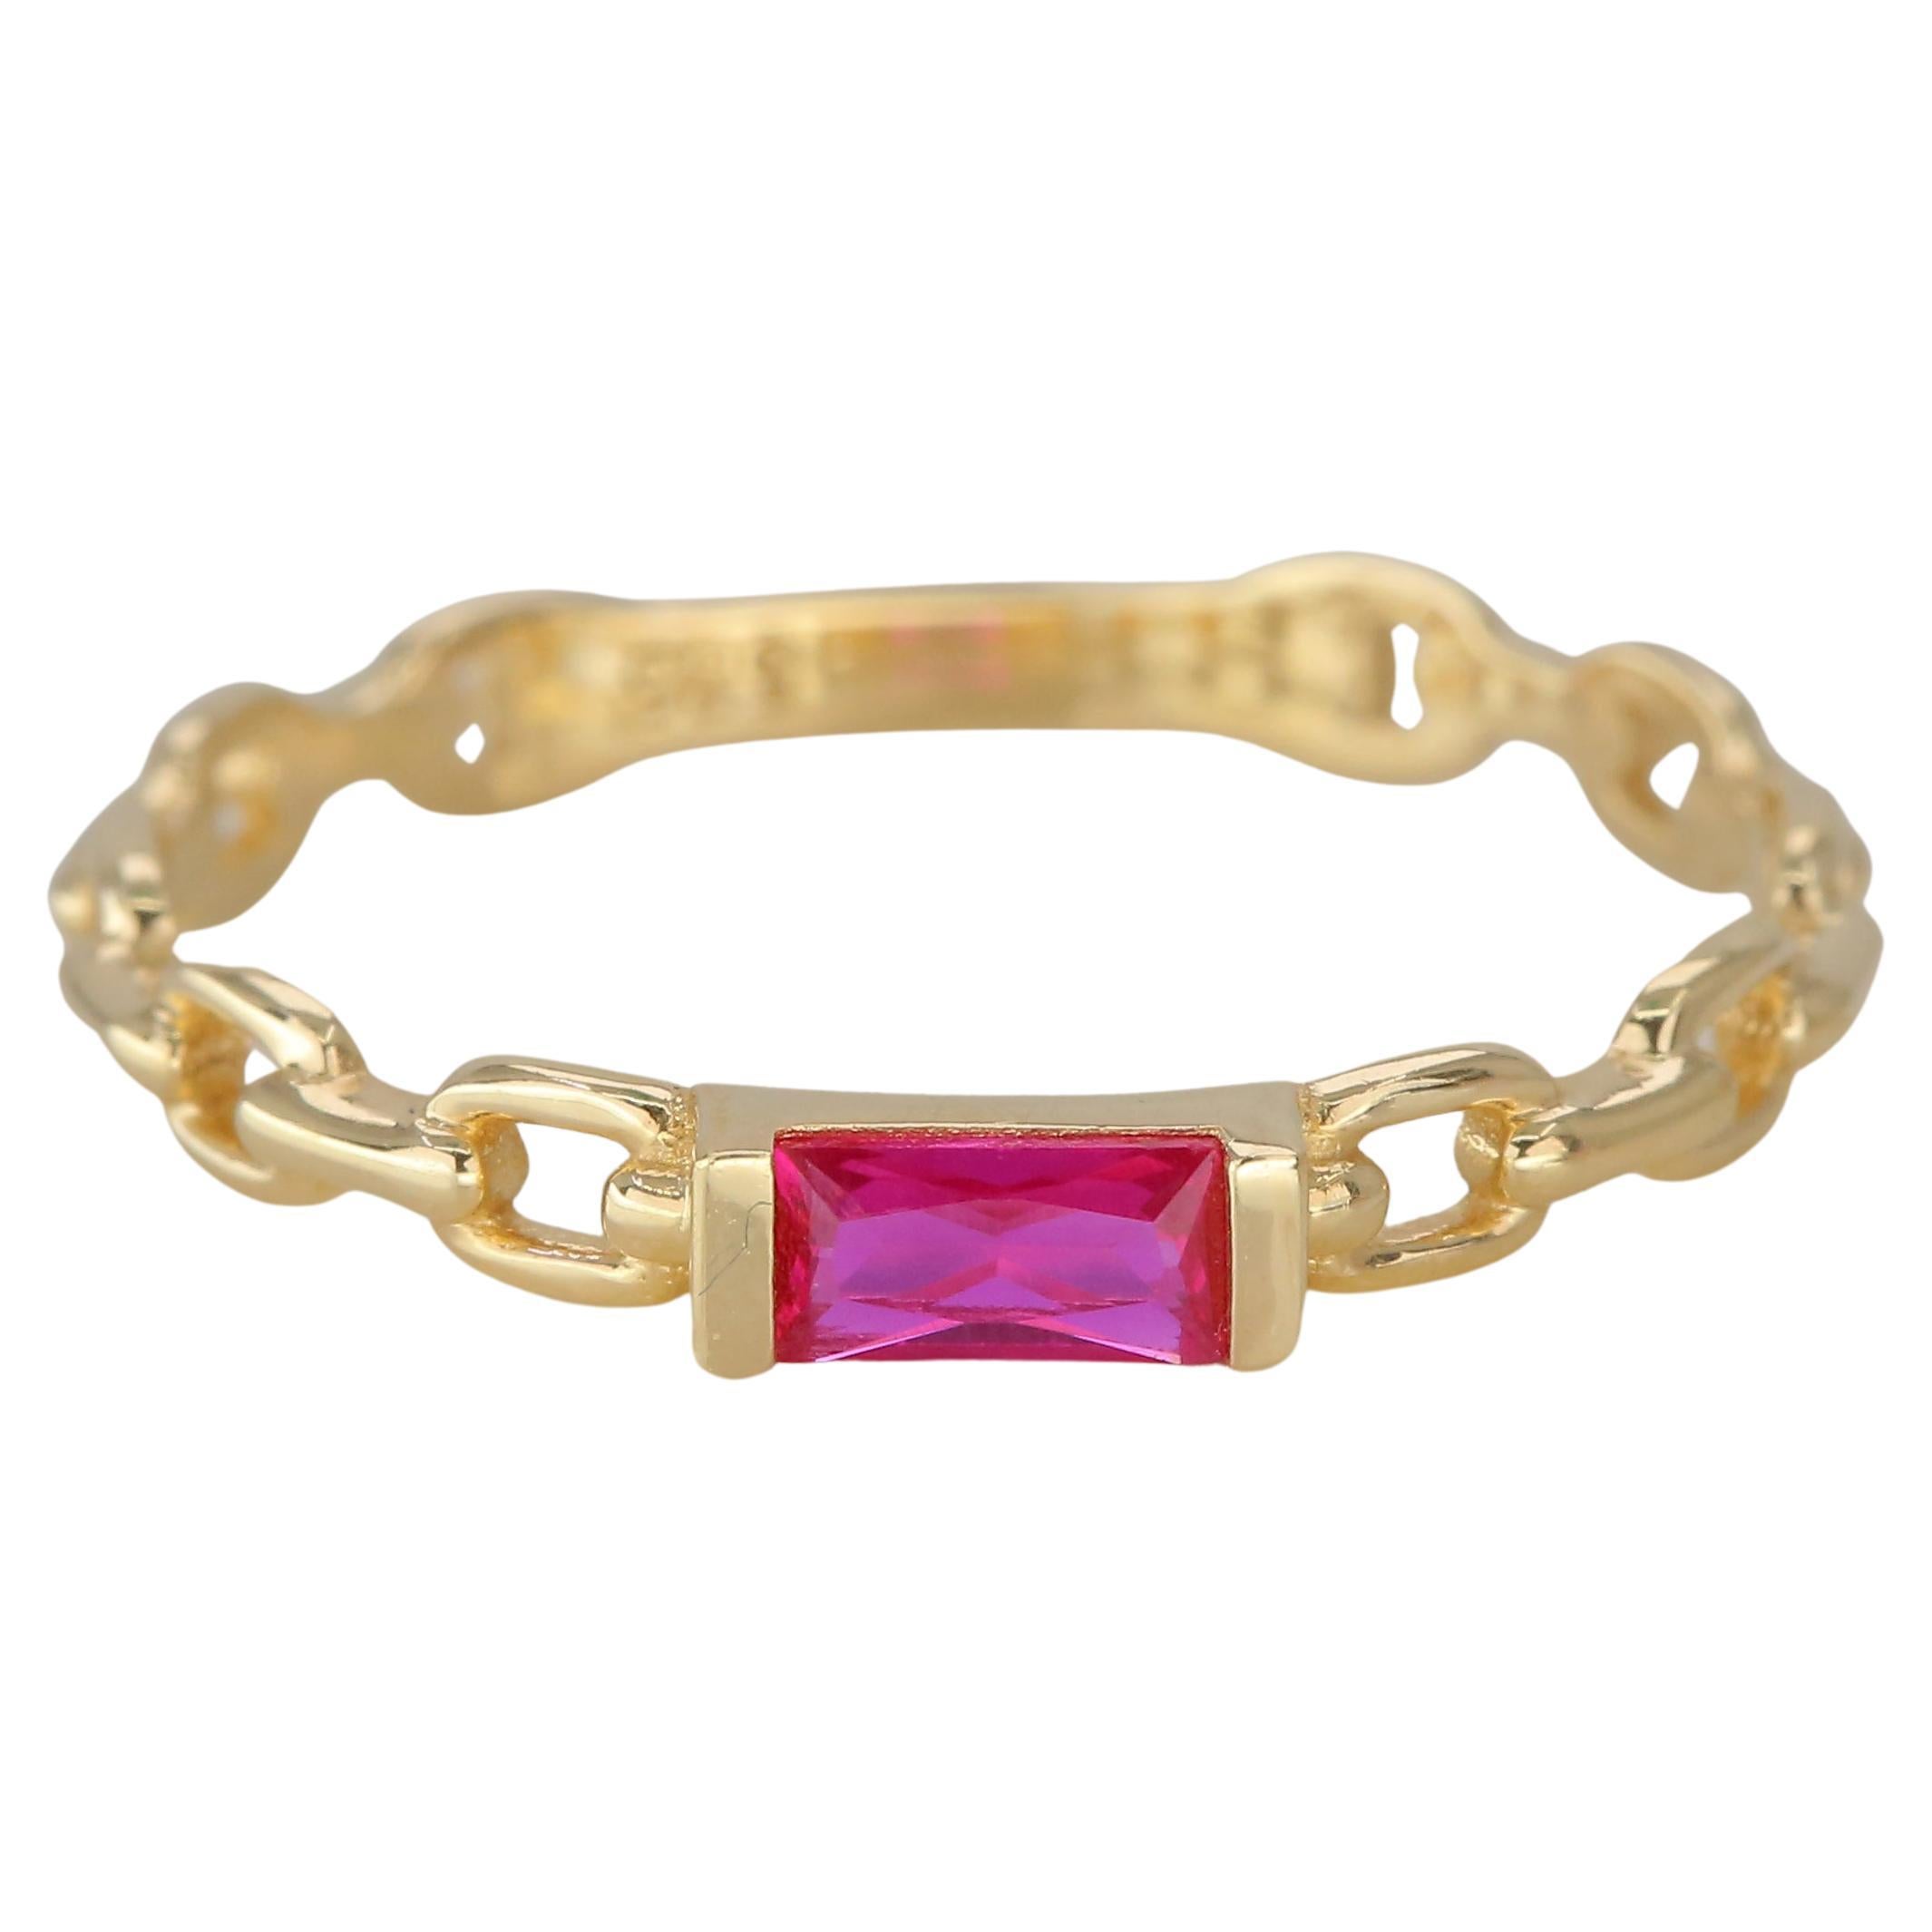 14 K Solid Gold Chain Link Ring -with Pink Quartz, Modern Minimal Ring